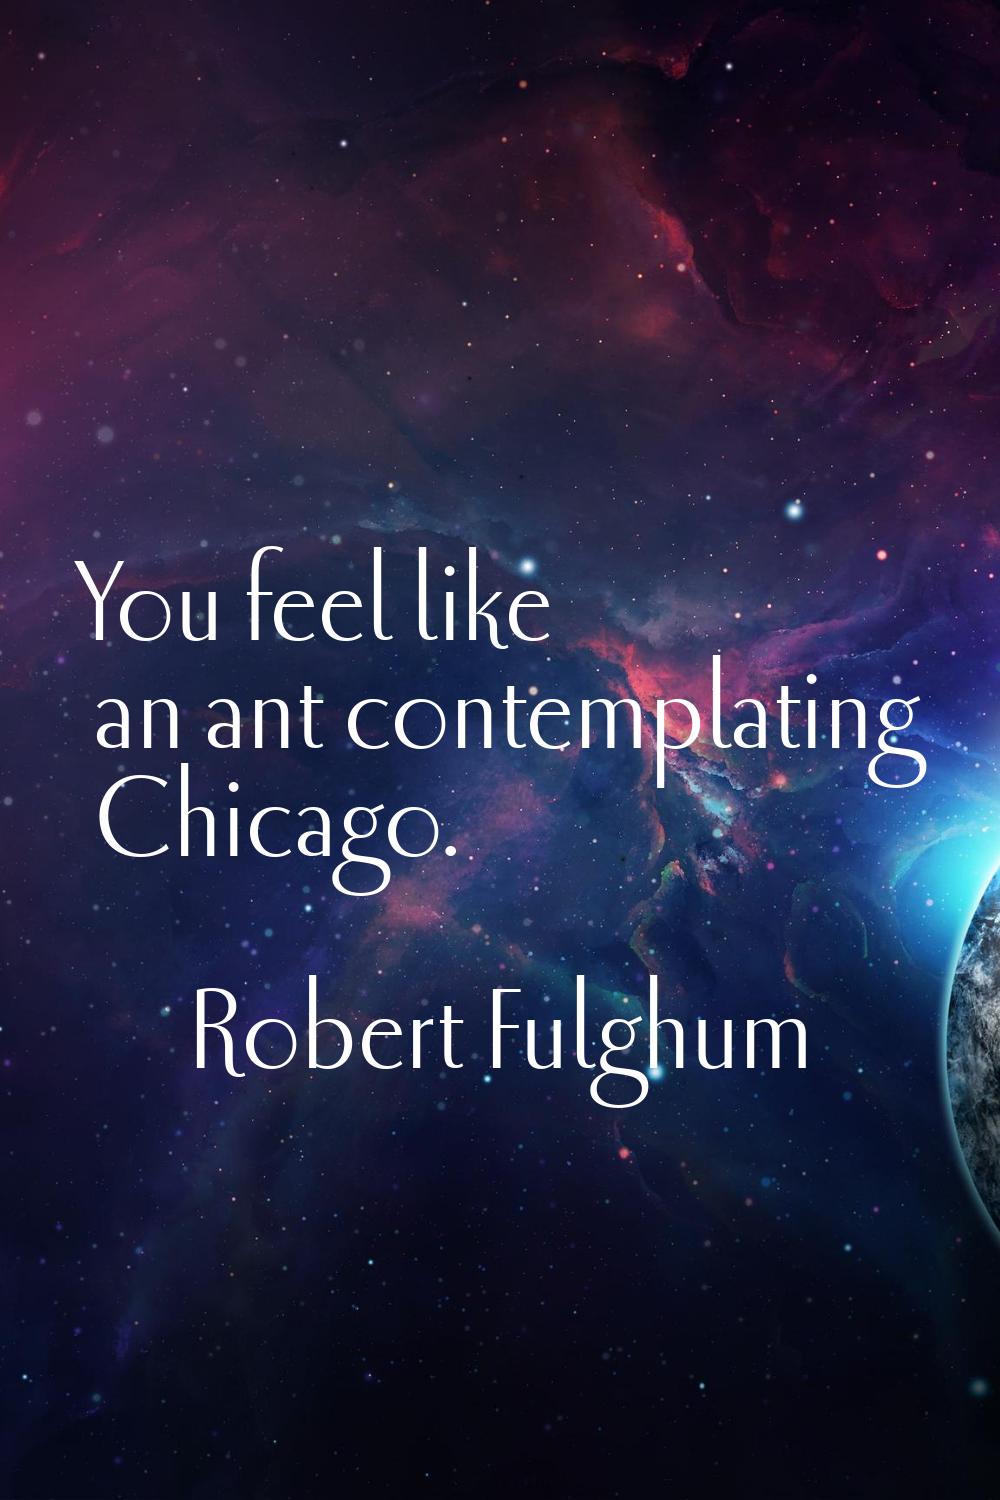 You feel like an ant contemplating Chicago.